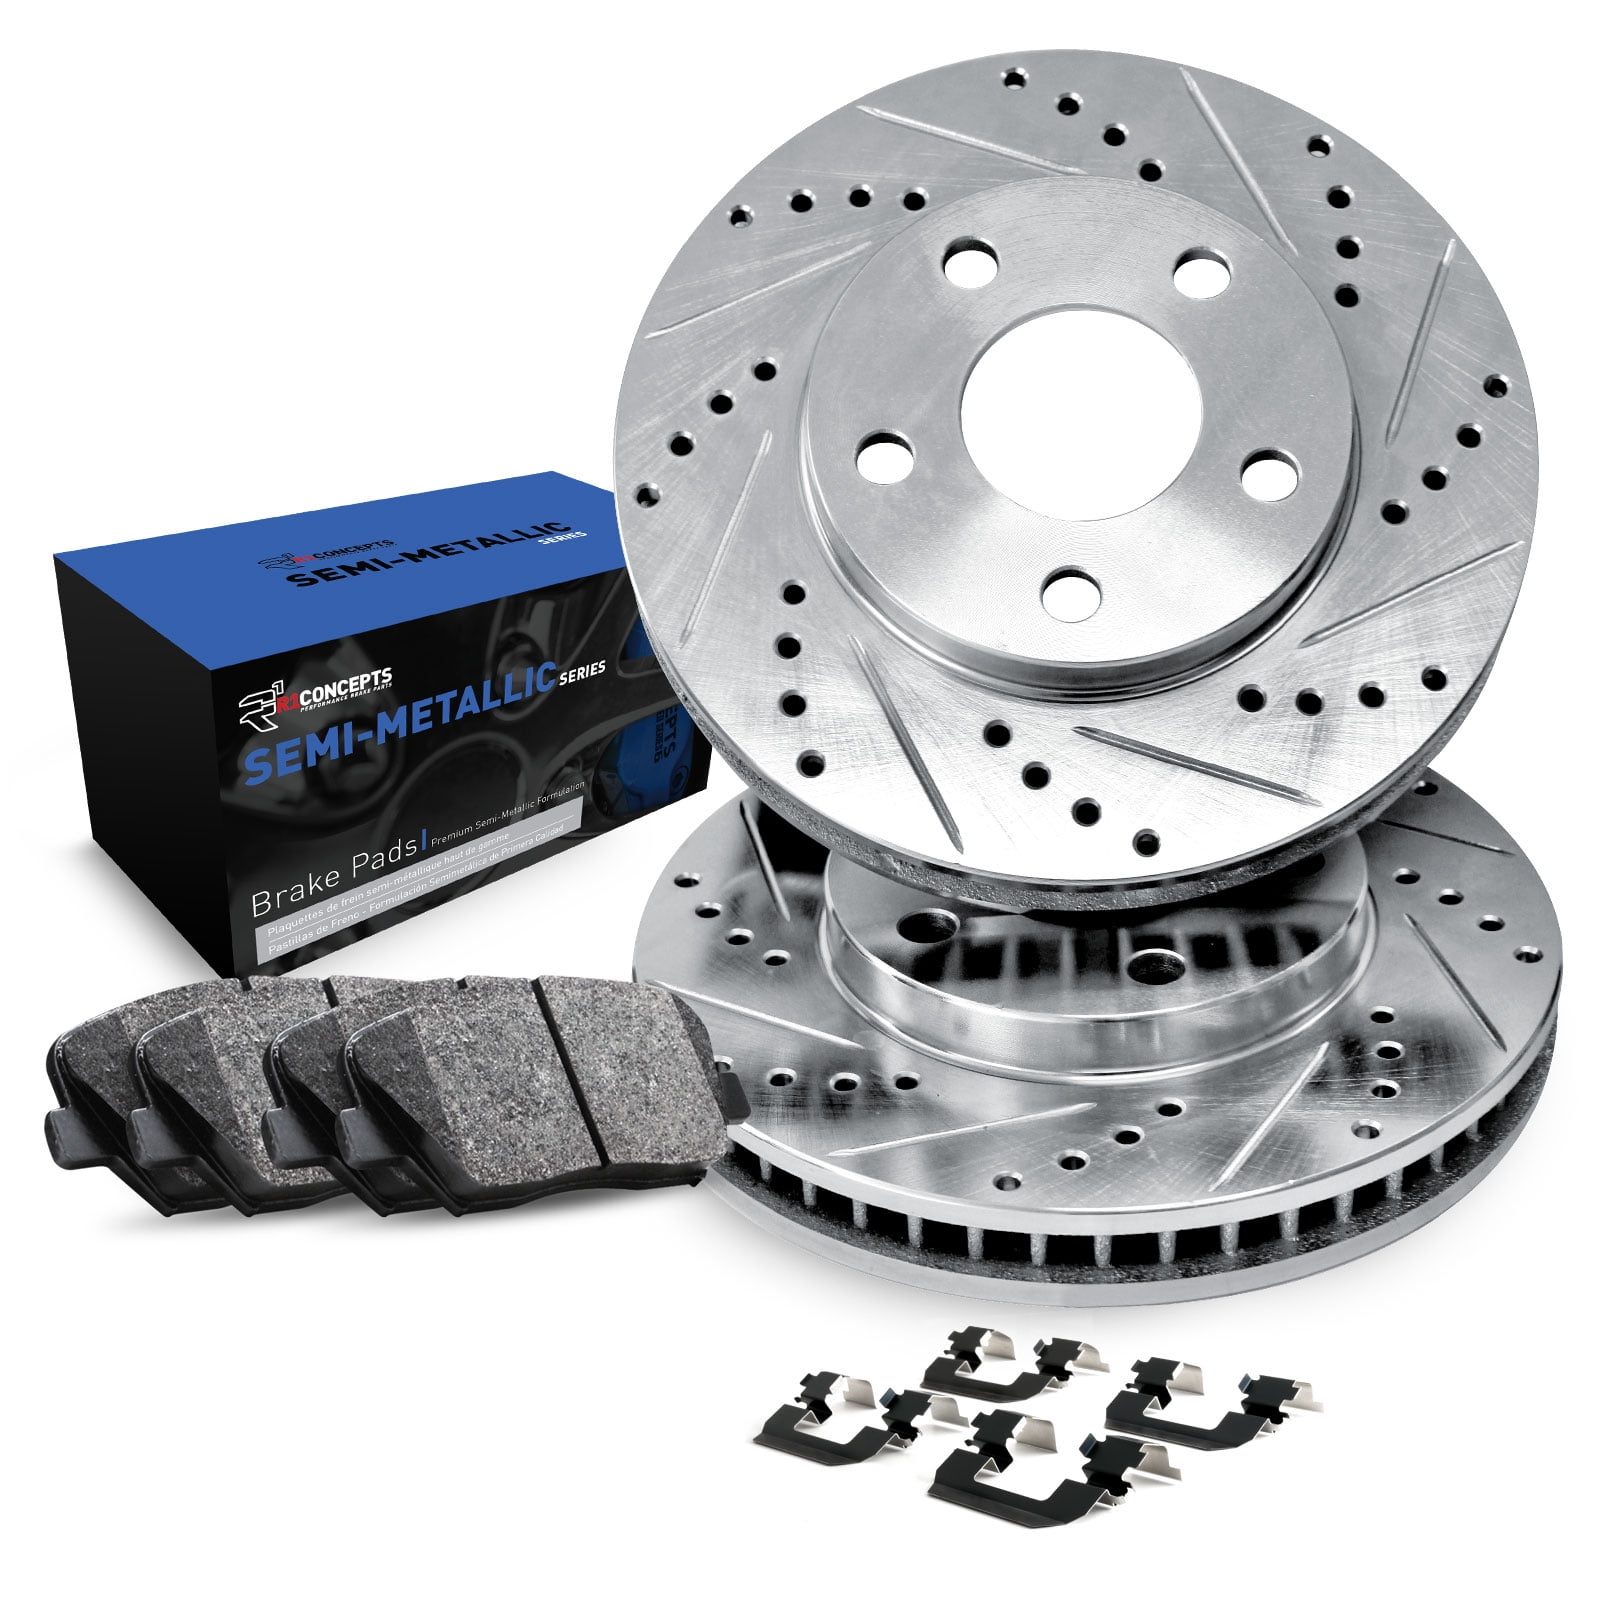 Rear Drilled and Slotted Brake Rotors For Nissan Altima Juke Maxima Sentra